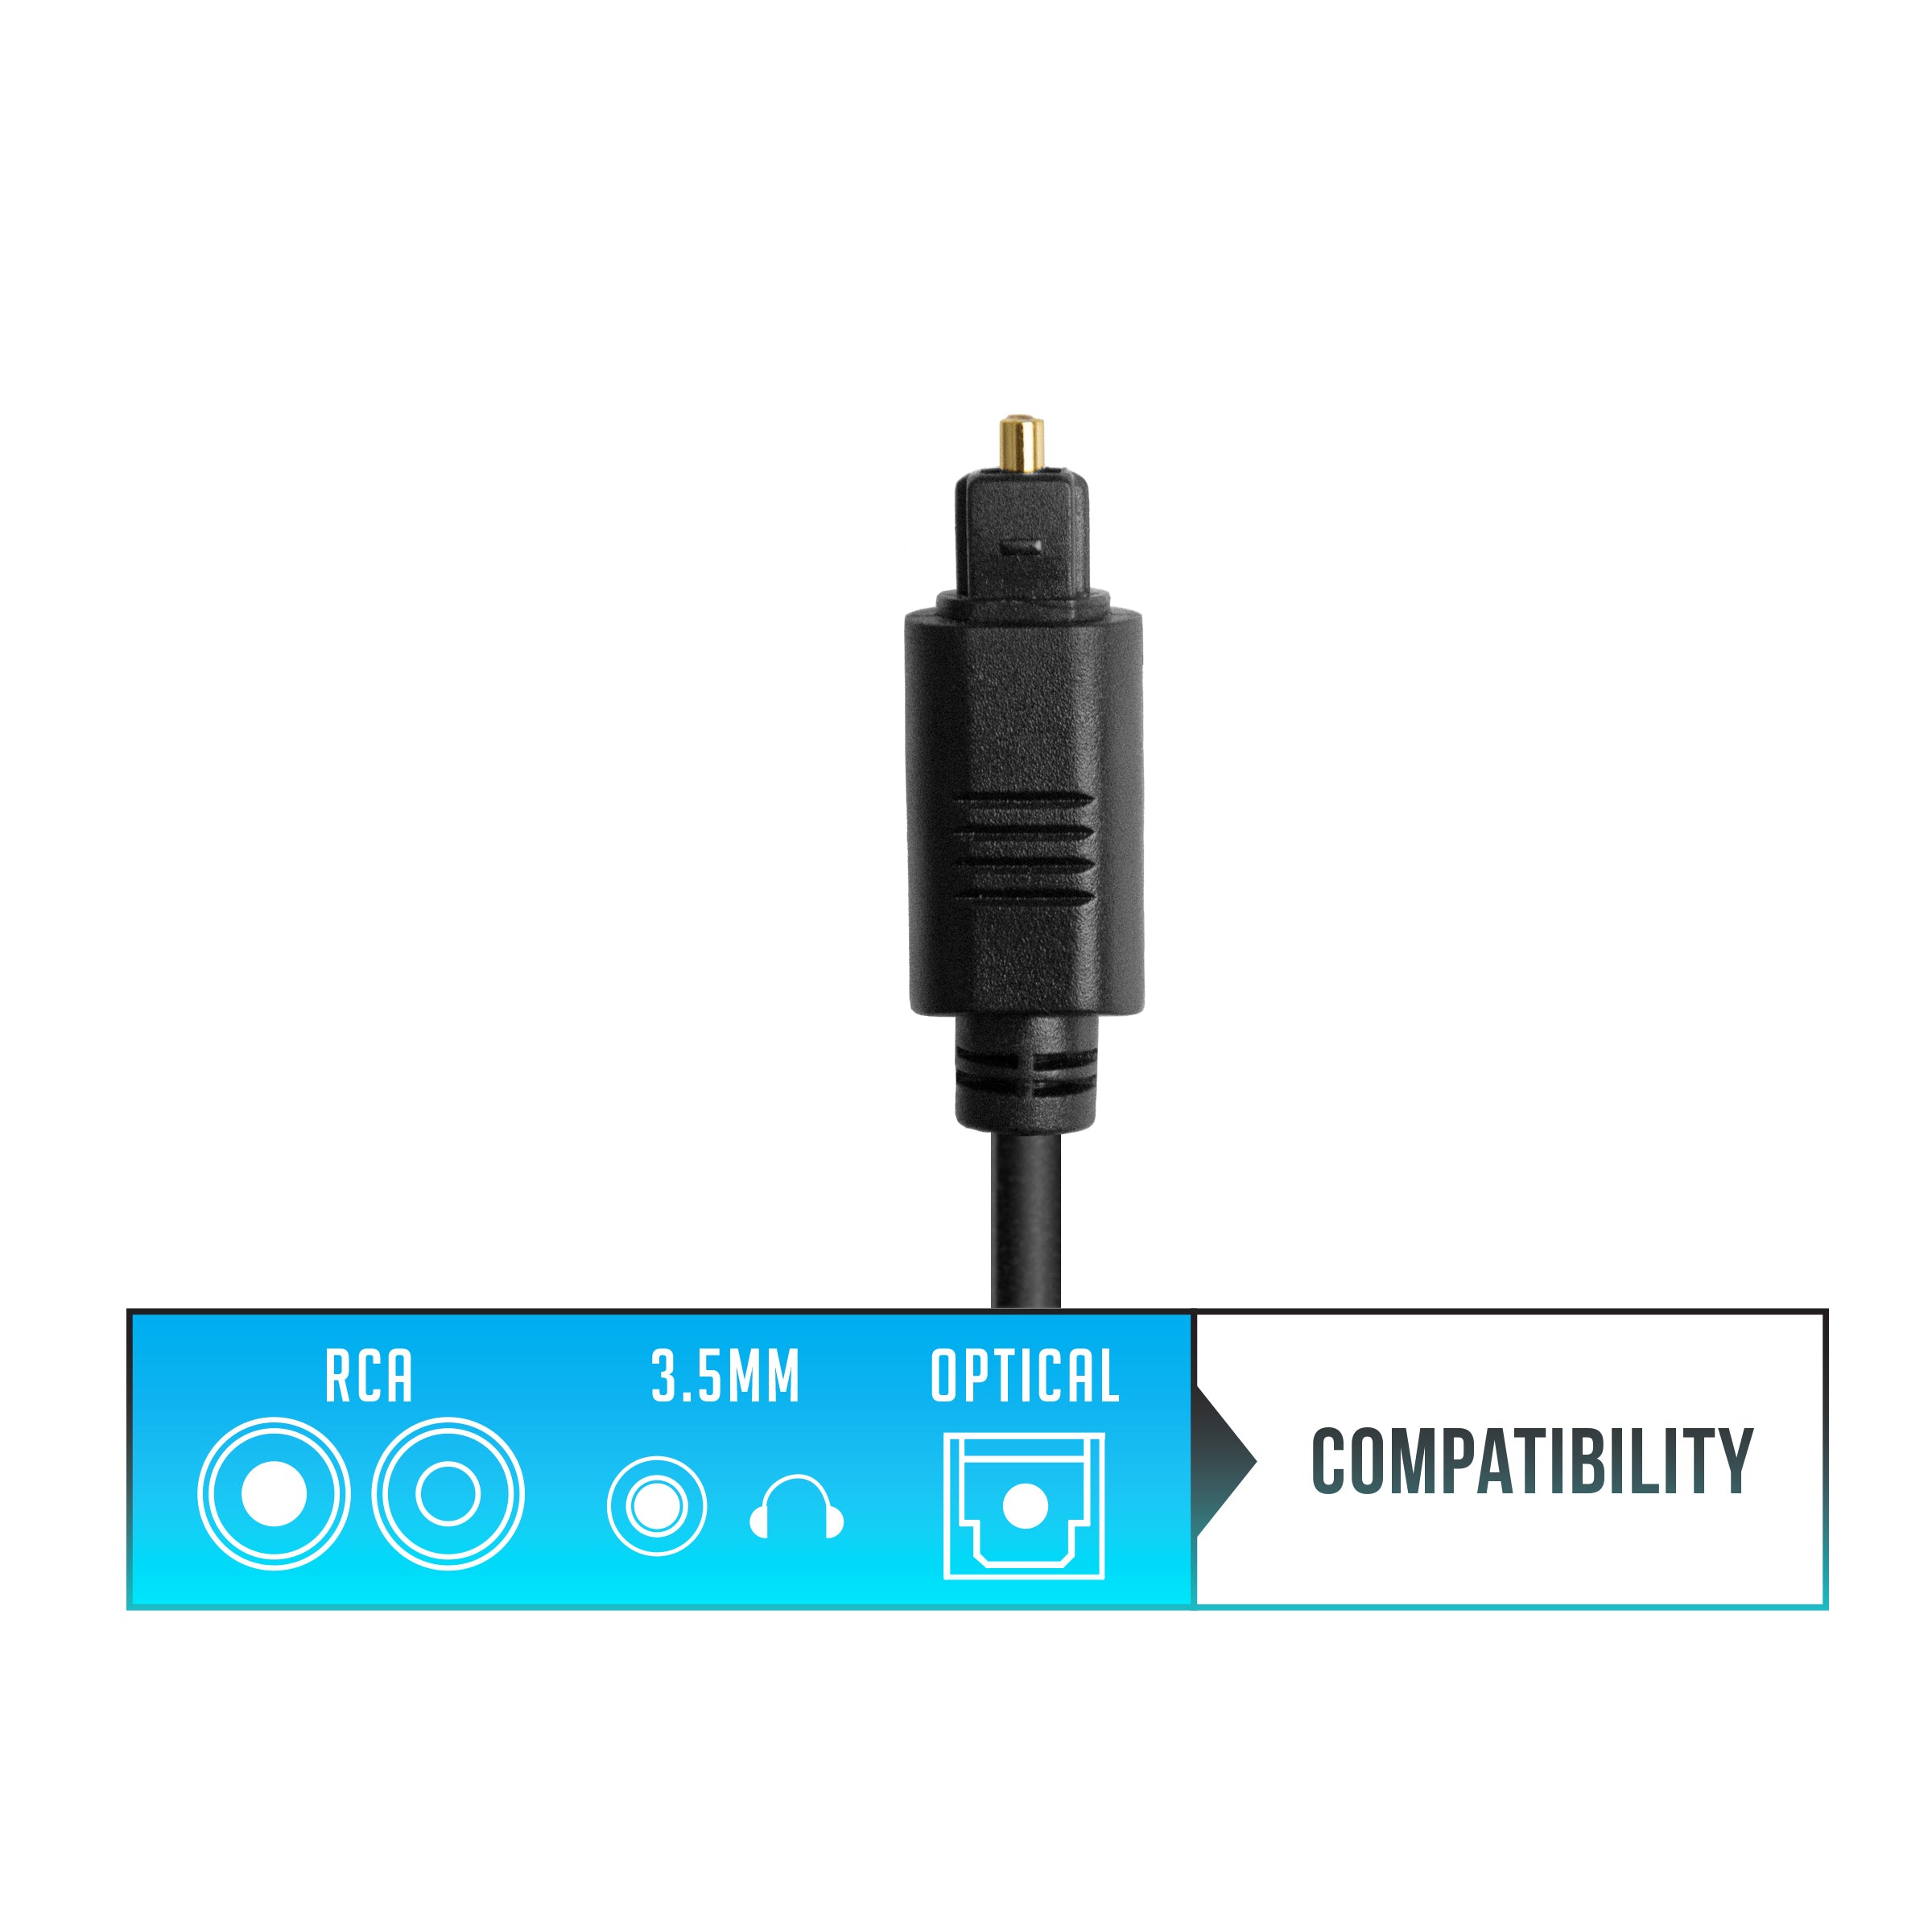 A close-up image of a black 3.5mm audio jack cable with a compatibility chart below showing icons for rca, 3.5mm, and optical connections.